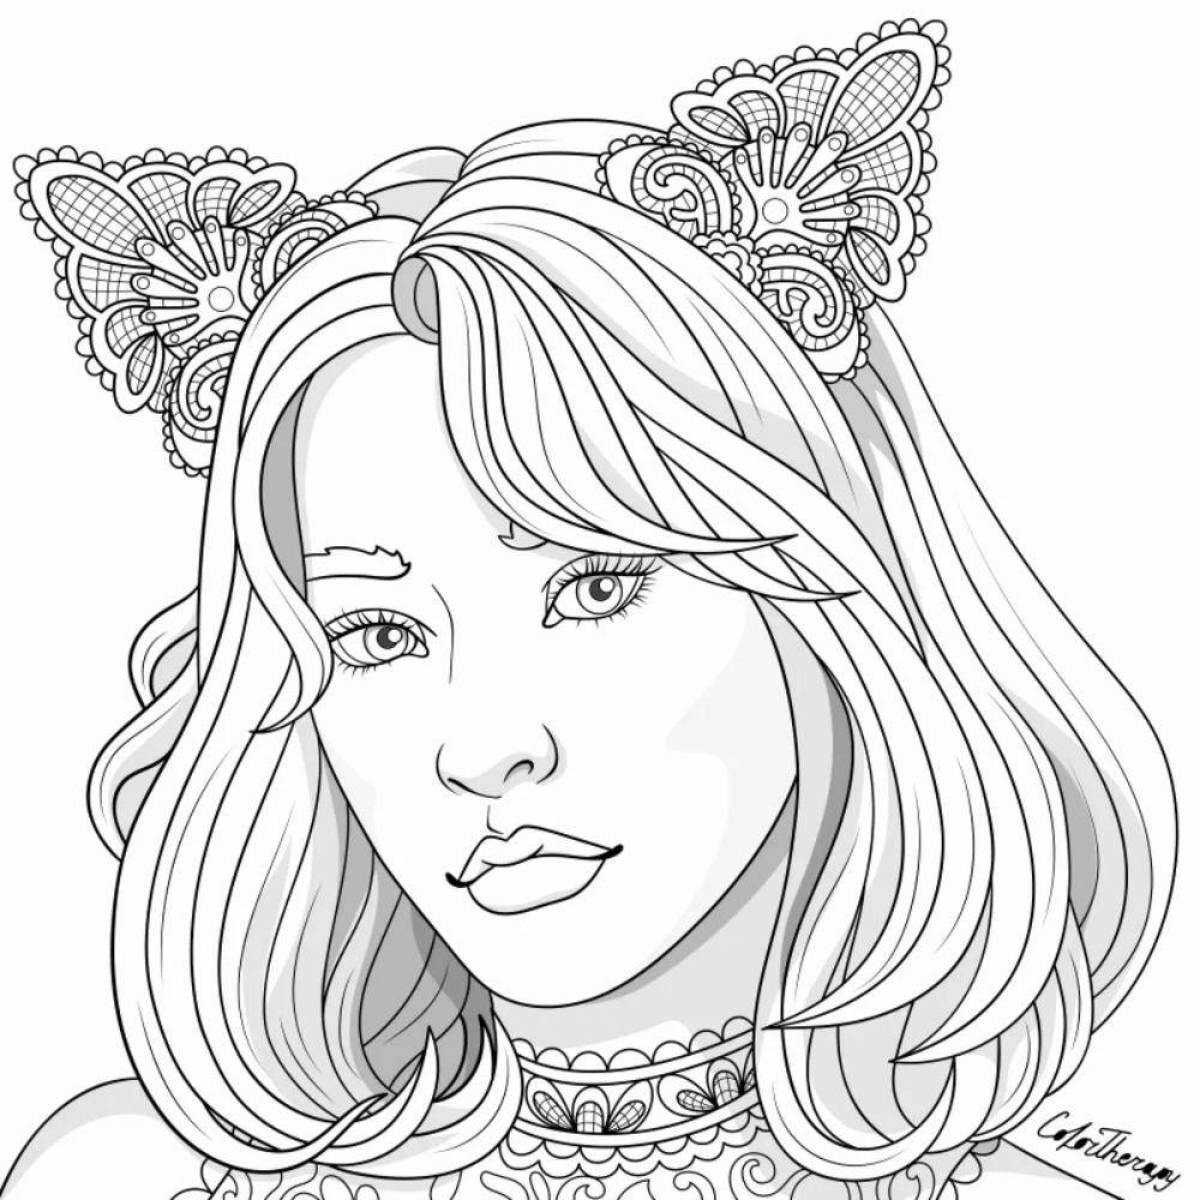 Glorious coloring book for girls 15-17 years old